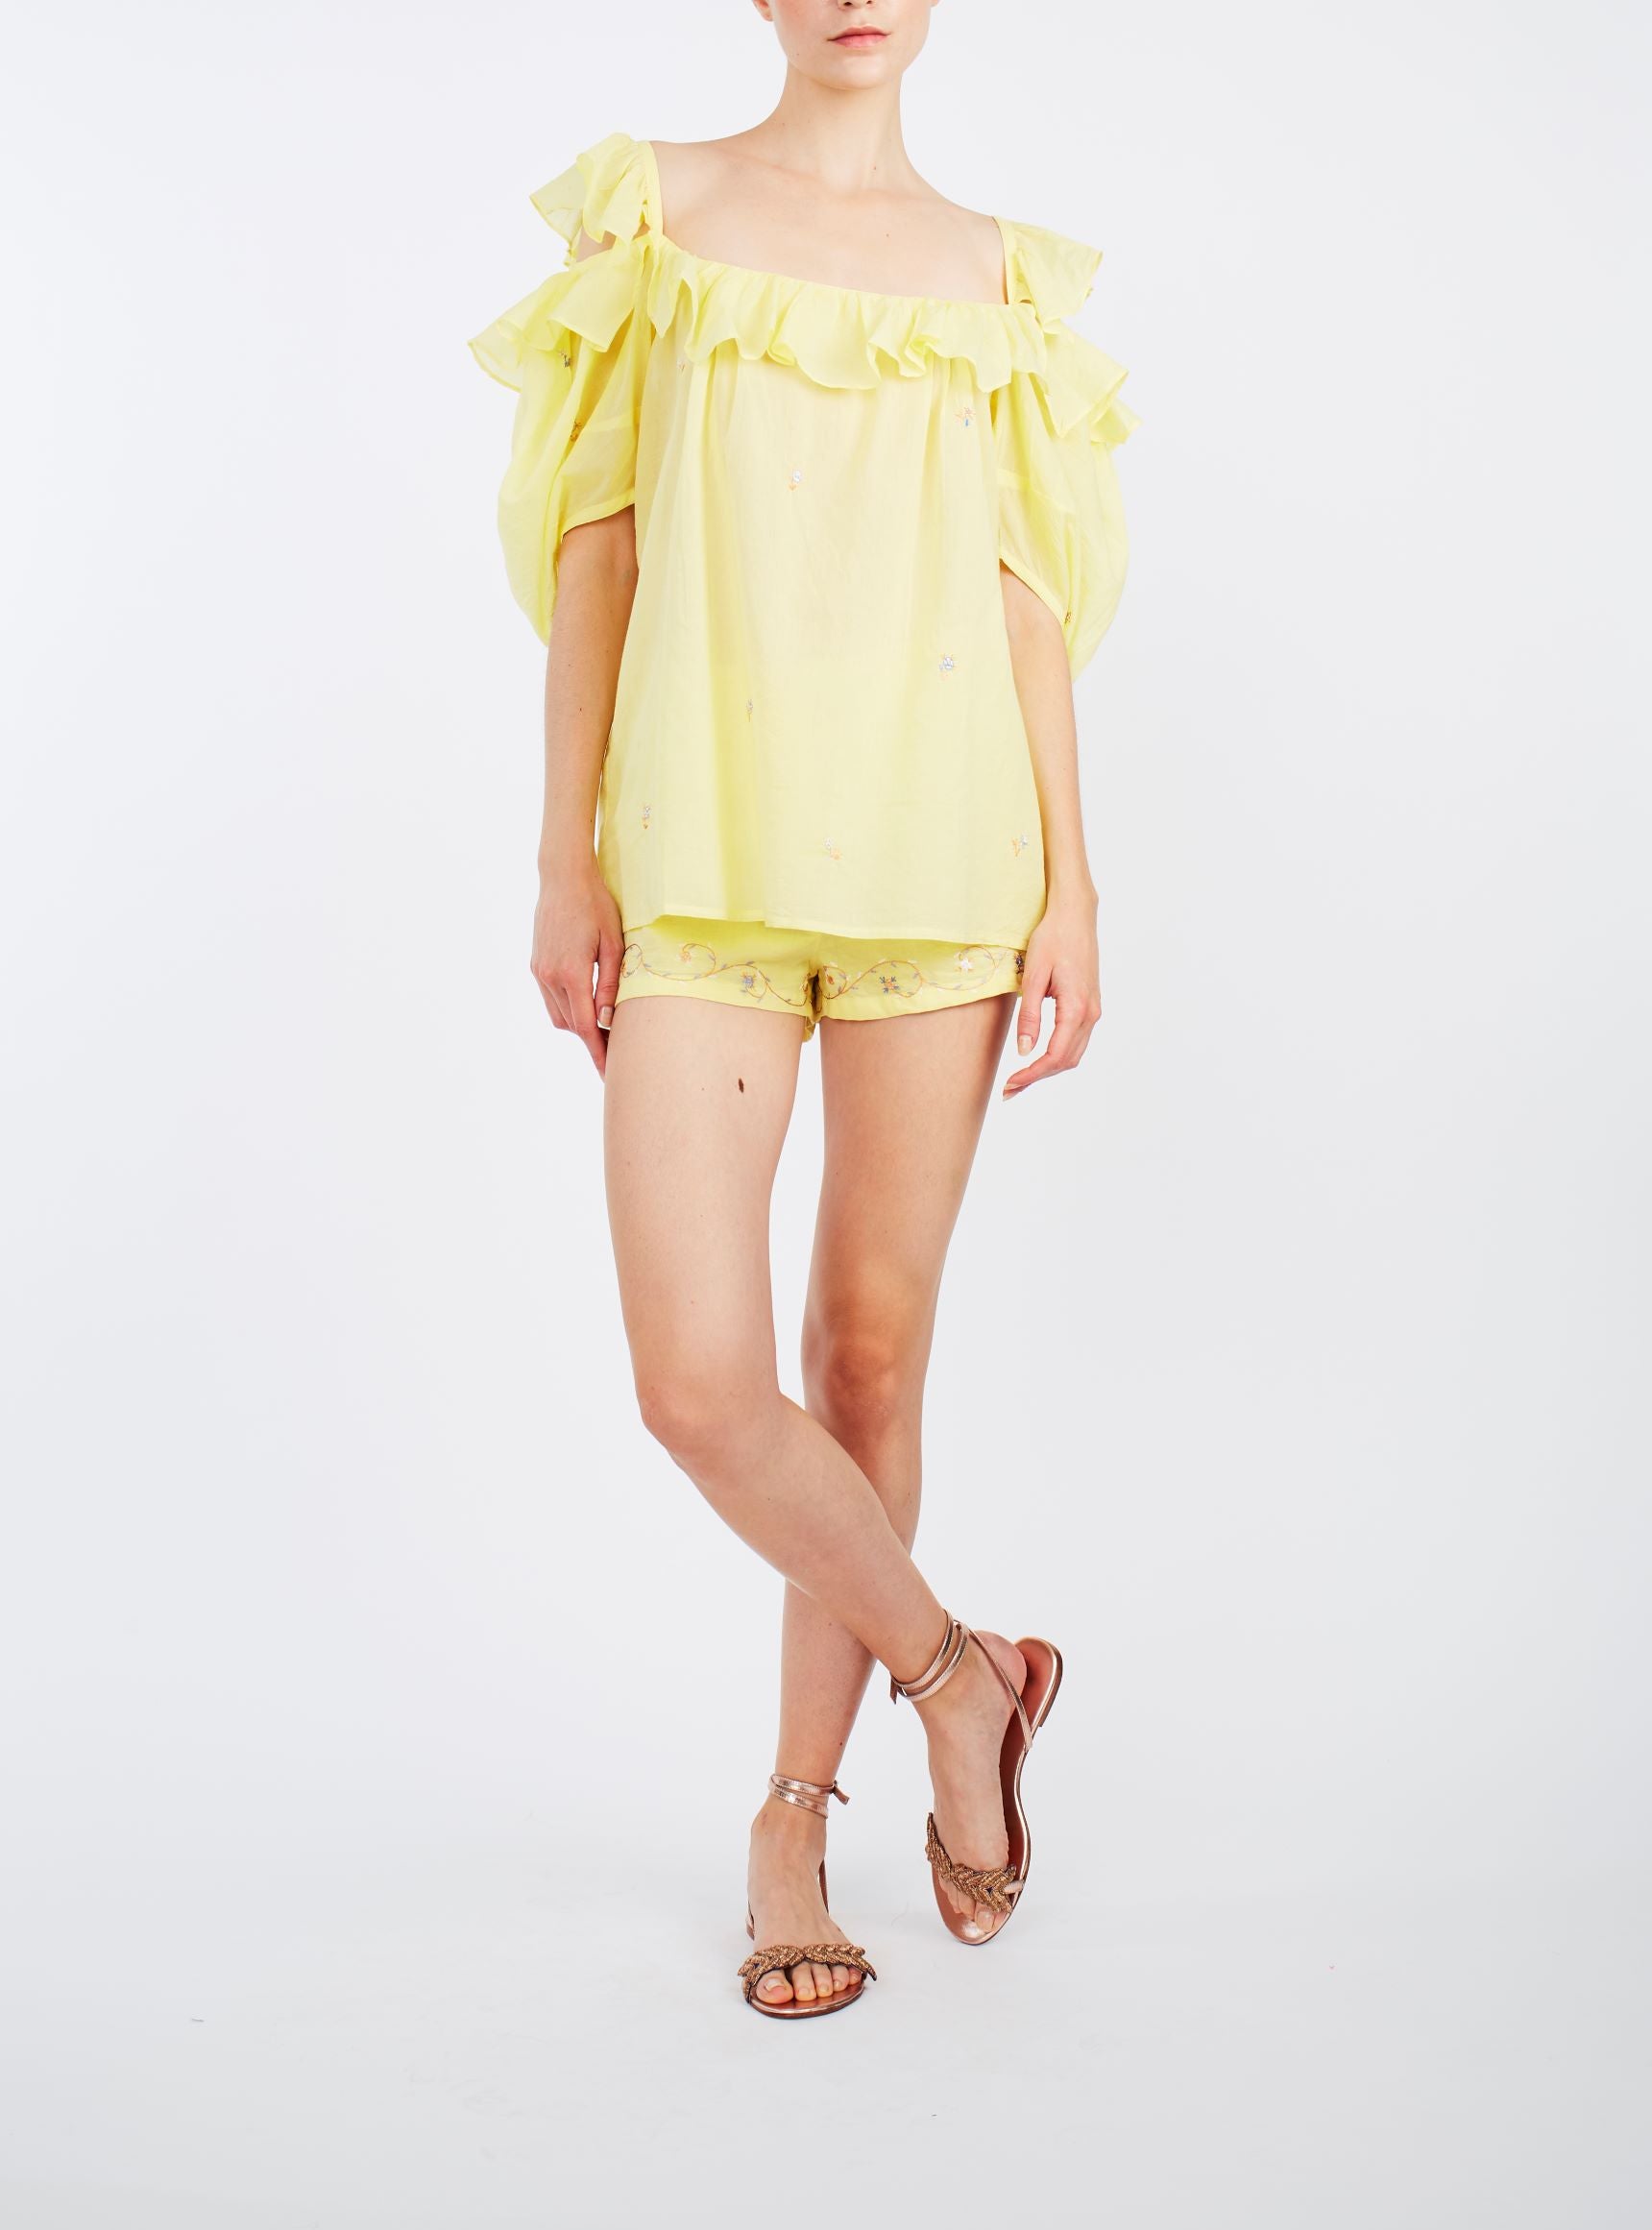 Large view of Venus Boudoir Sweet Lemon Blouse with Armand shorts by Thierry Colson